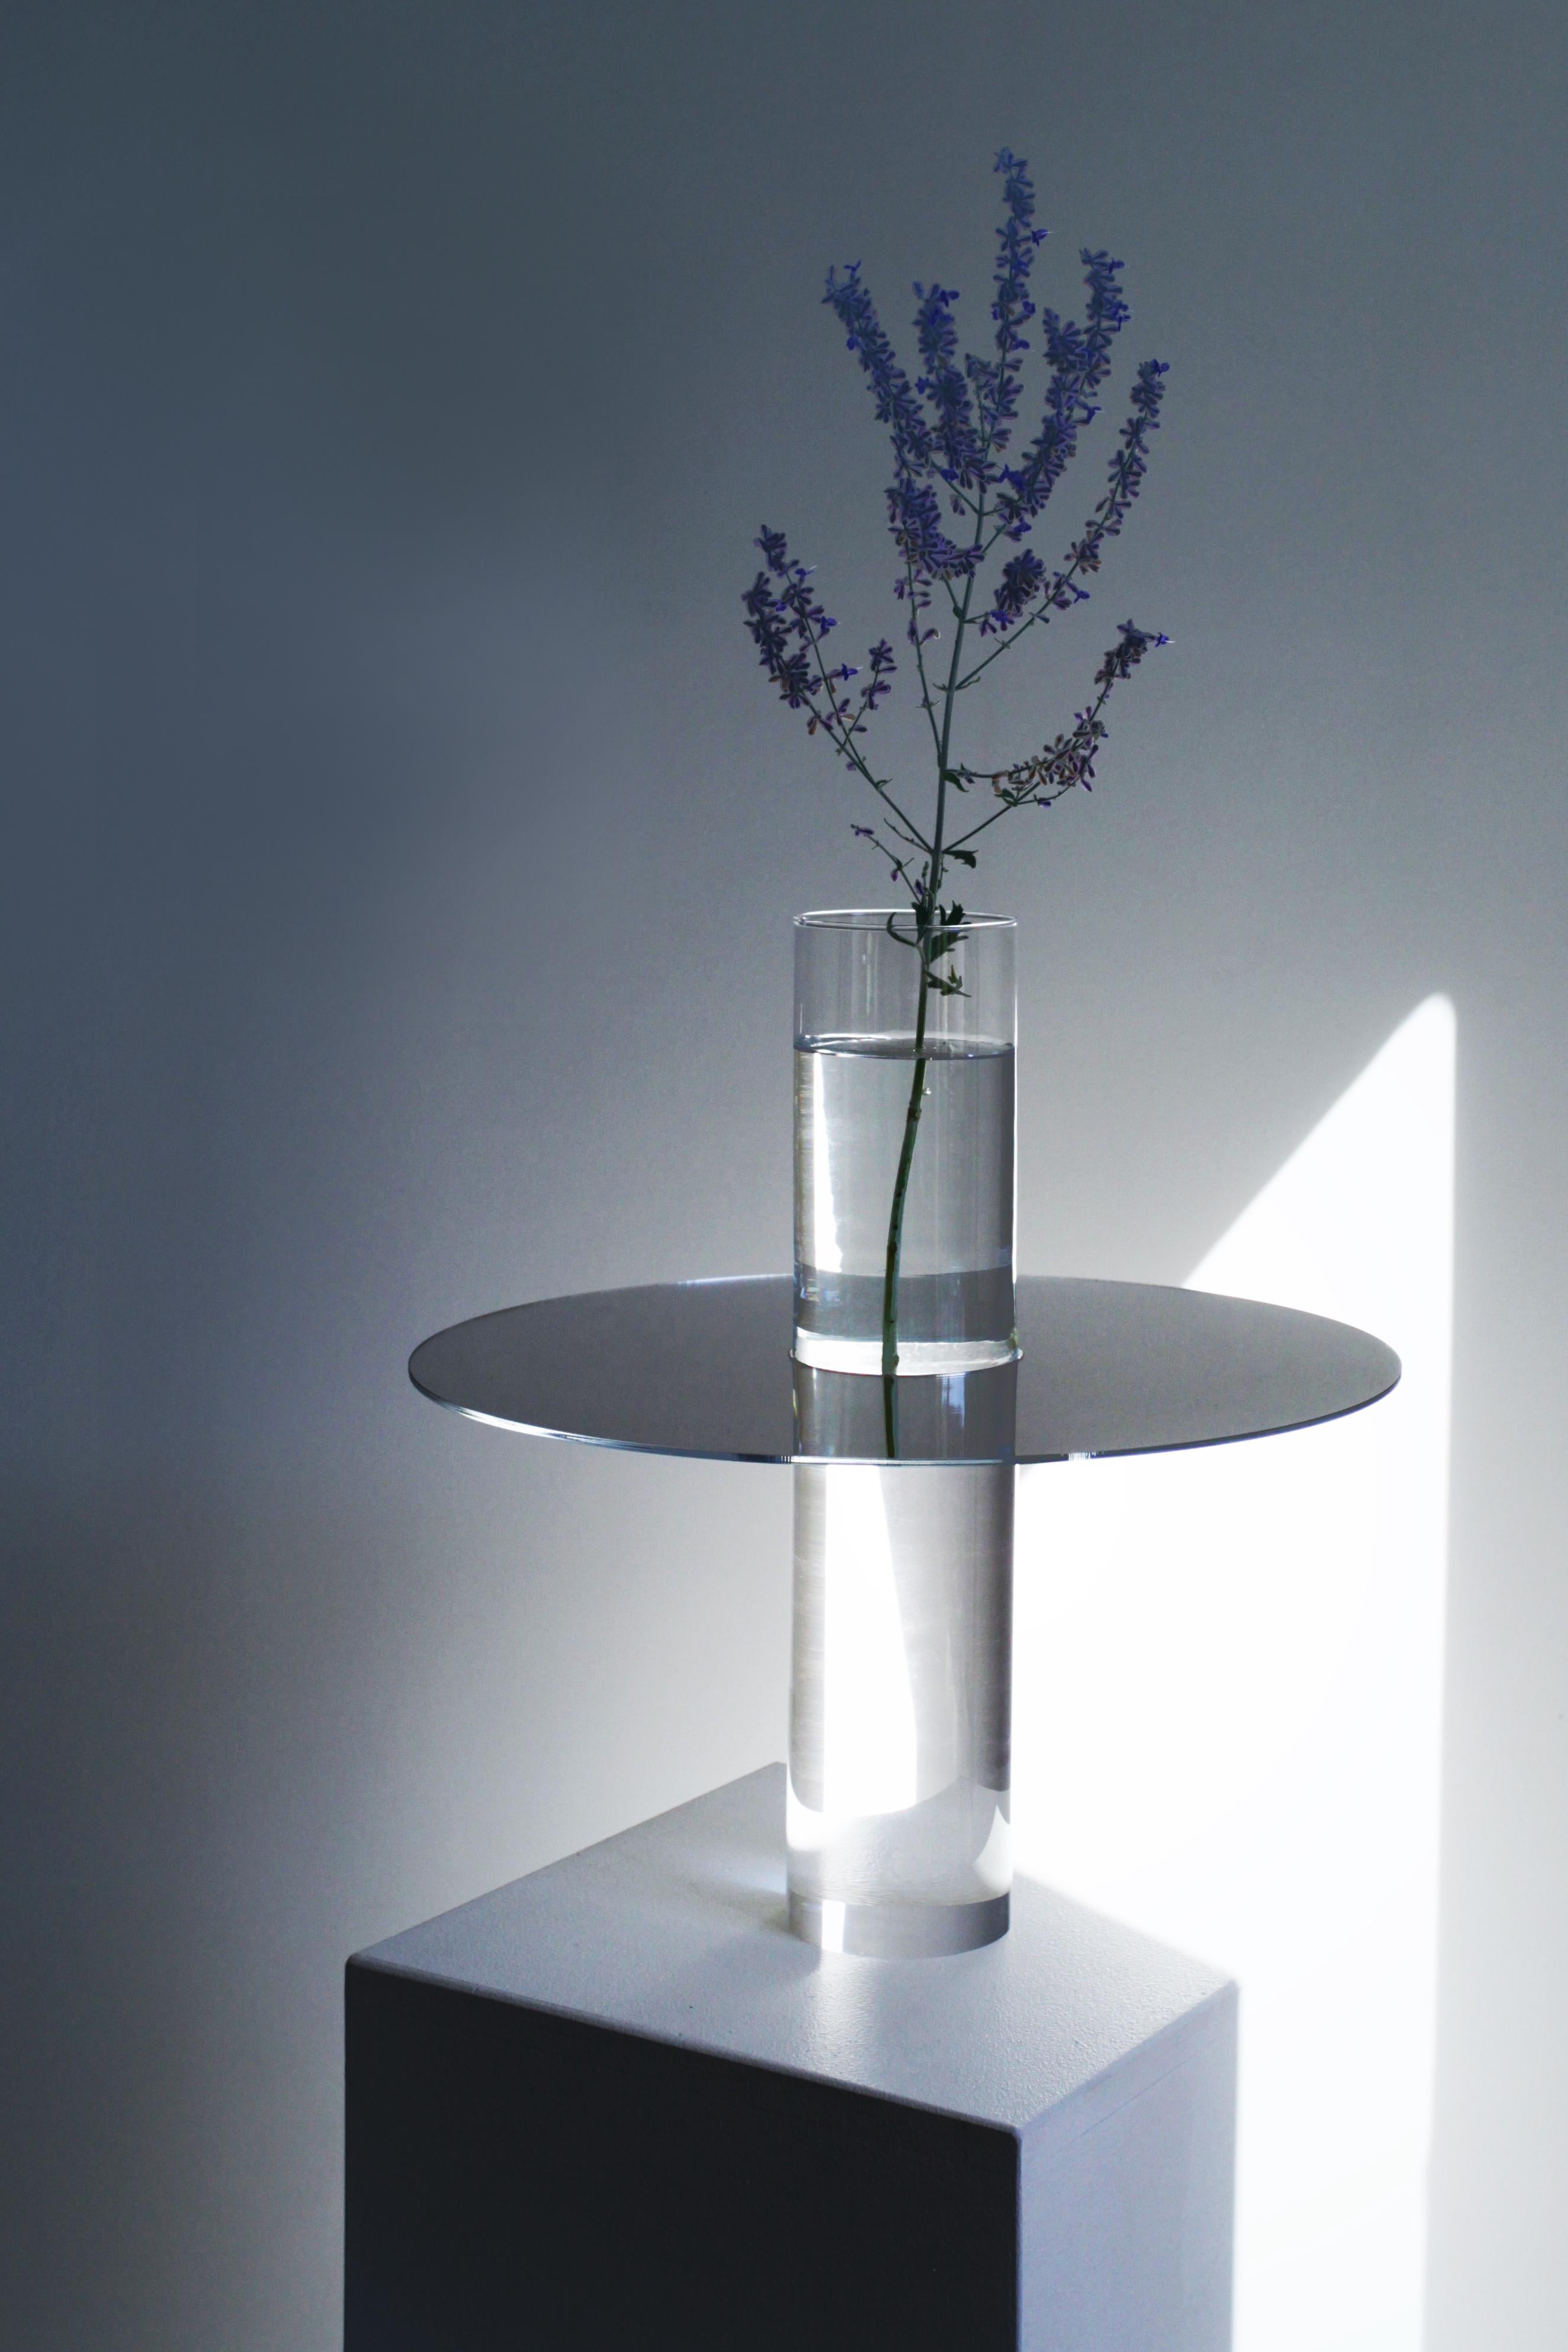 Sakura Enigmatic vase by Arturo Erbsman
Handmade, Limited edition, Signed and numbered
Dimensions: Size1: 29 x 28 x 29 cm, Size2: 39 x 40 x 39 cm
Materials: Acrylic glass and mirror / glass container

True to its name, the Sakura vase